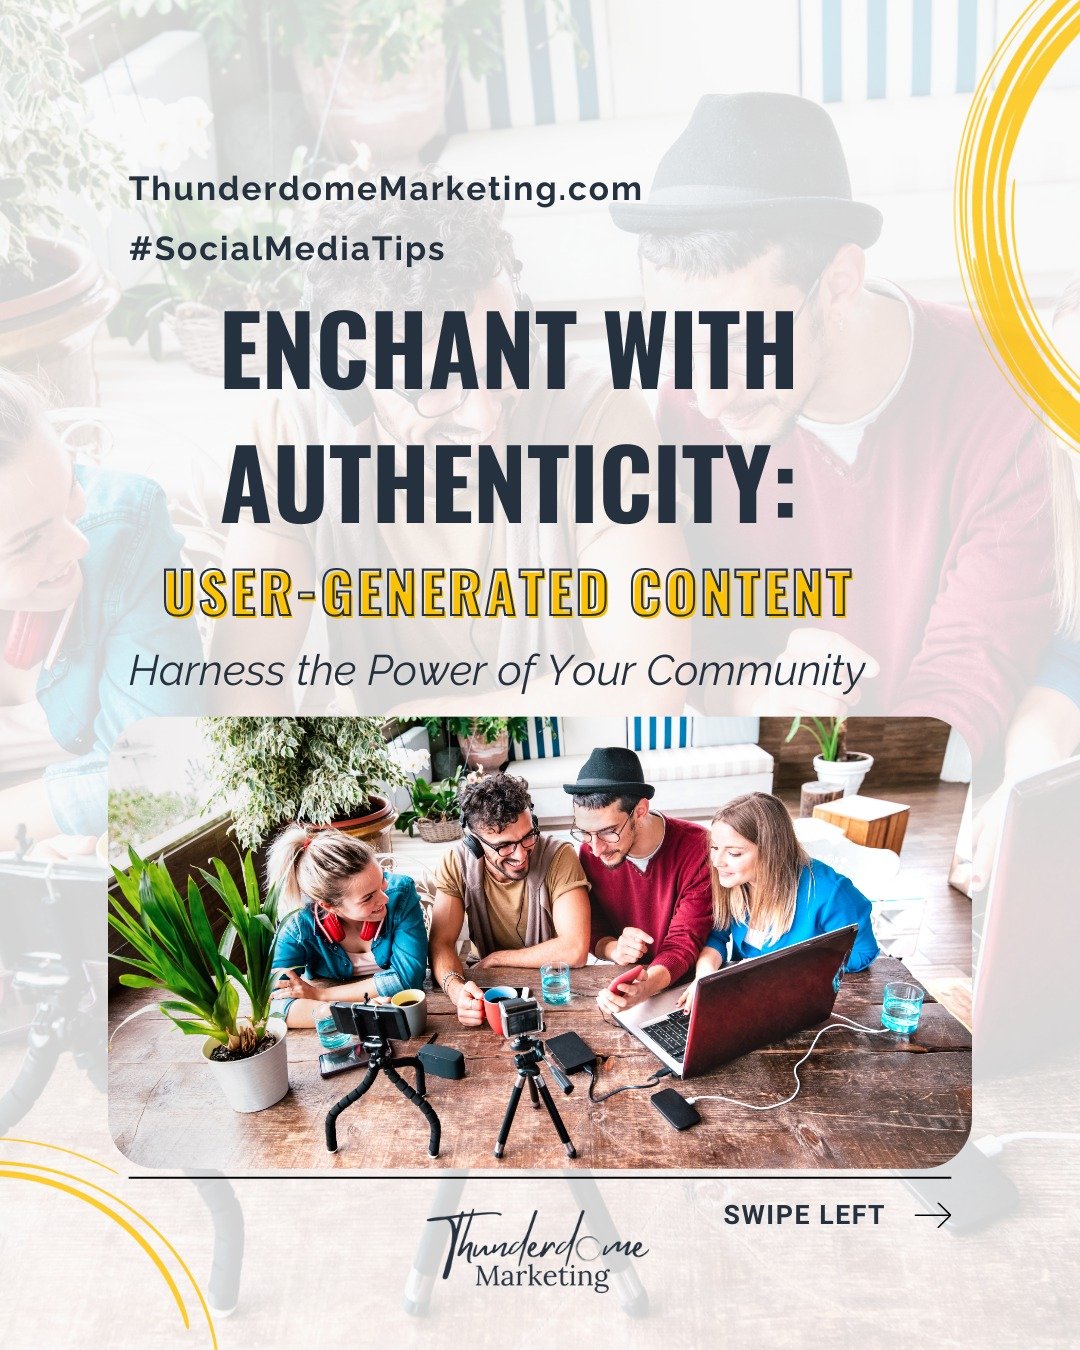 Elevate your brand with the authenticity of user-generated content, guided by Thunderdome Marketing.
Embrace: 
💡 Community-Created Content: Harnessing the voice of your customers to enhance credibility. 
💡 Authentic Engagement: Building trust throu